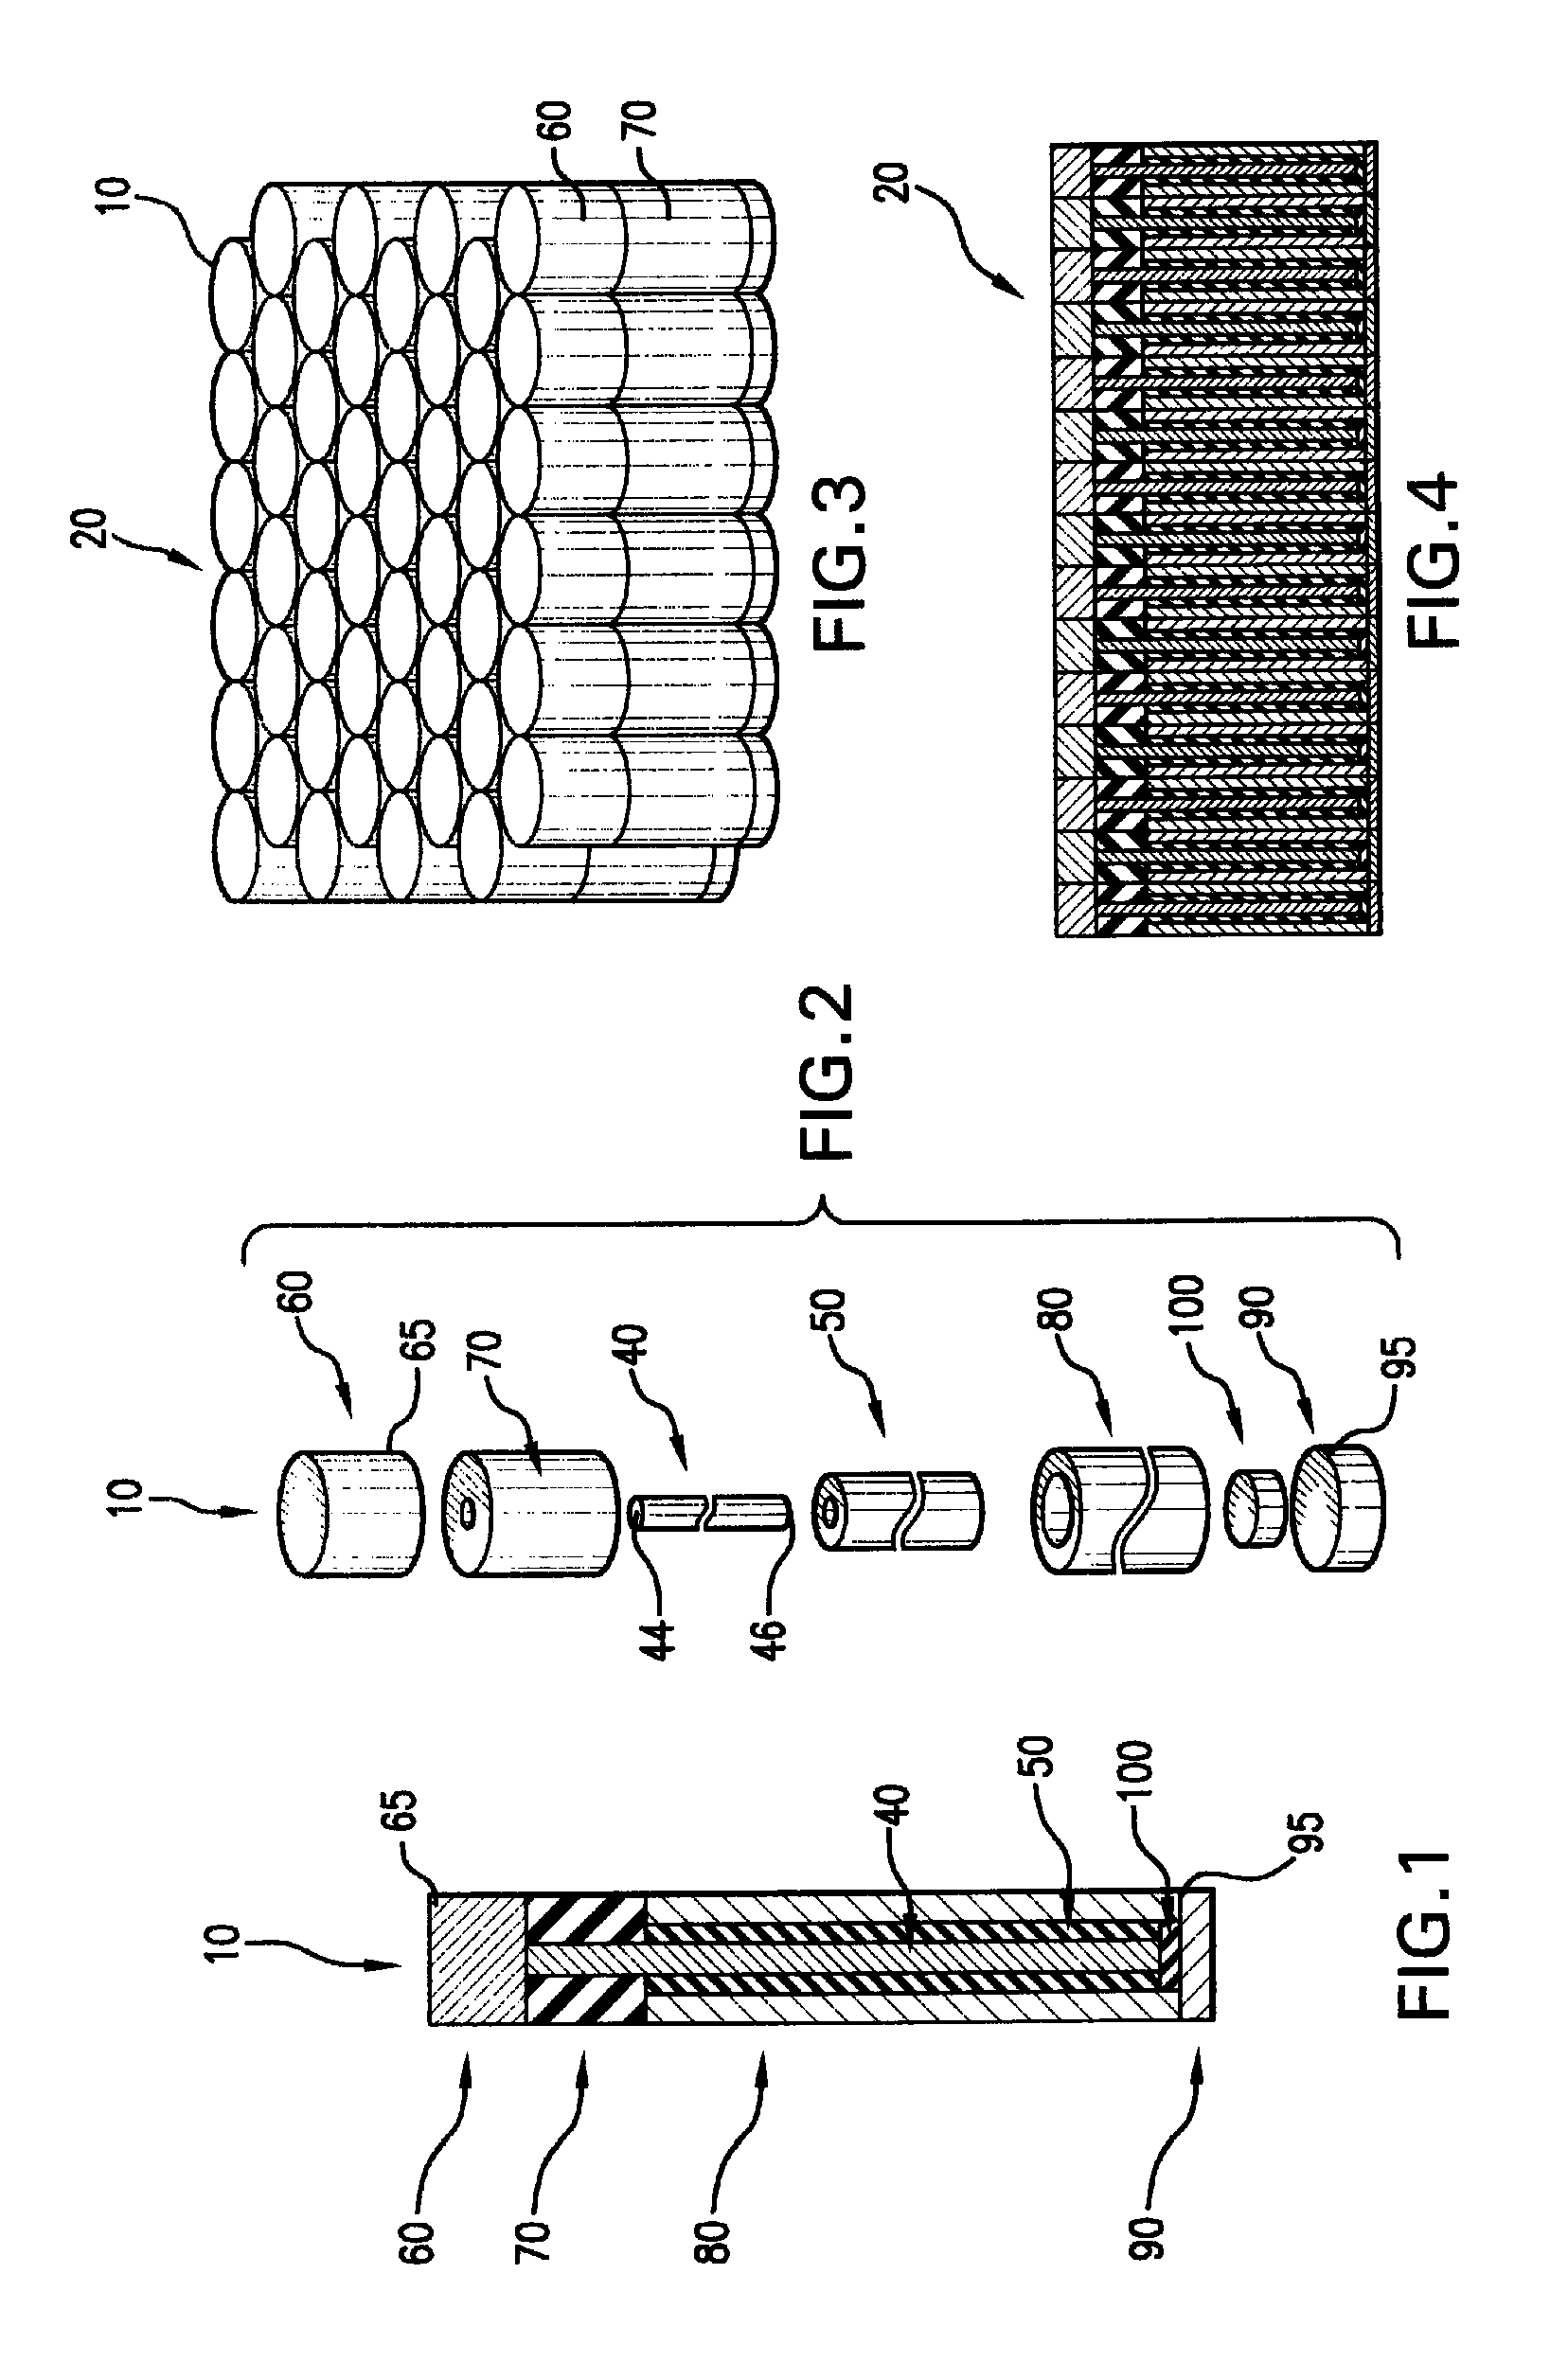 Clad fiber capacitor and method of making same